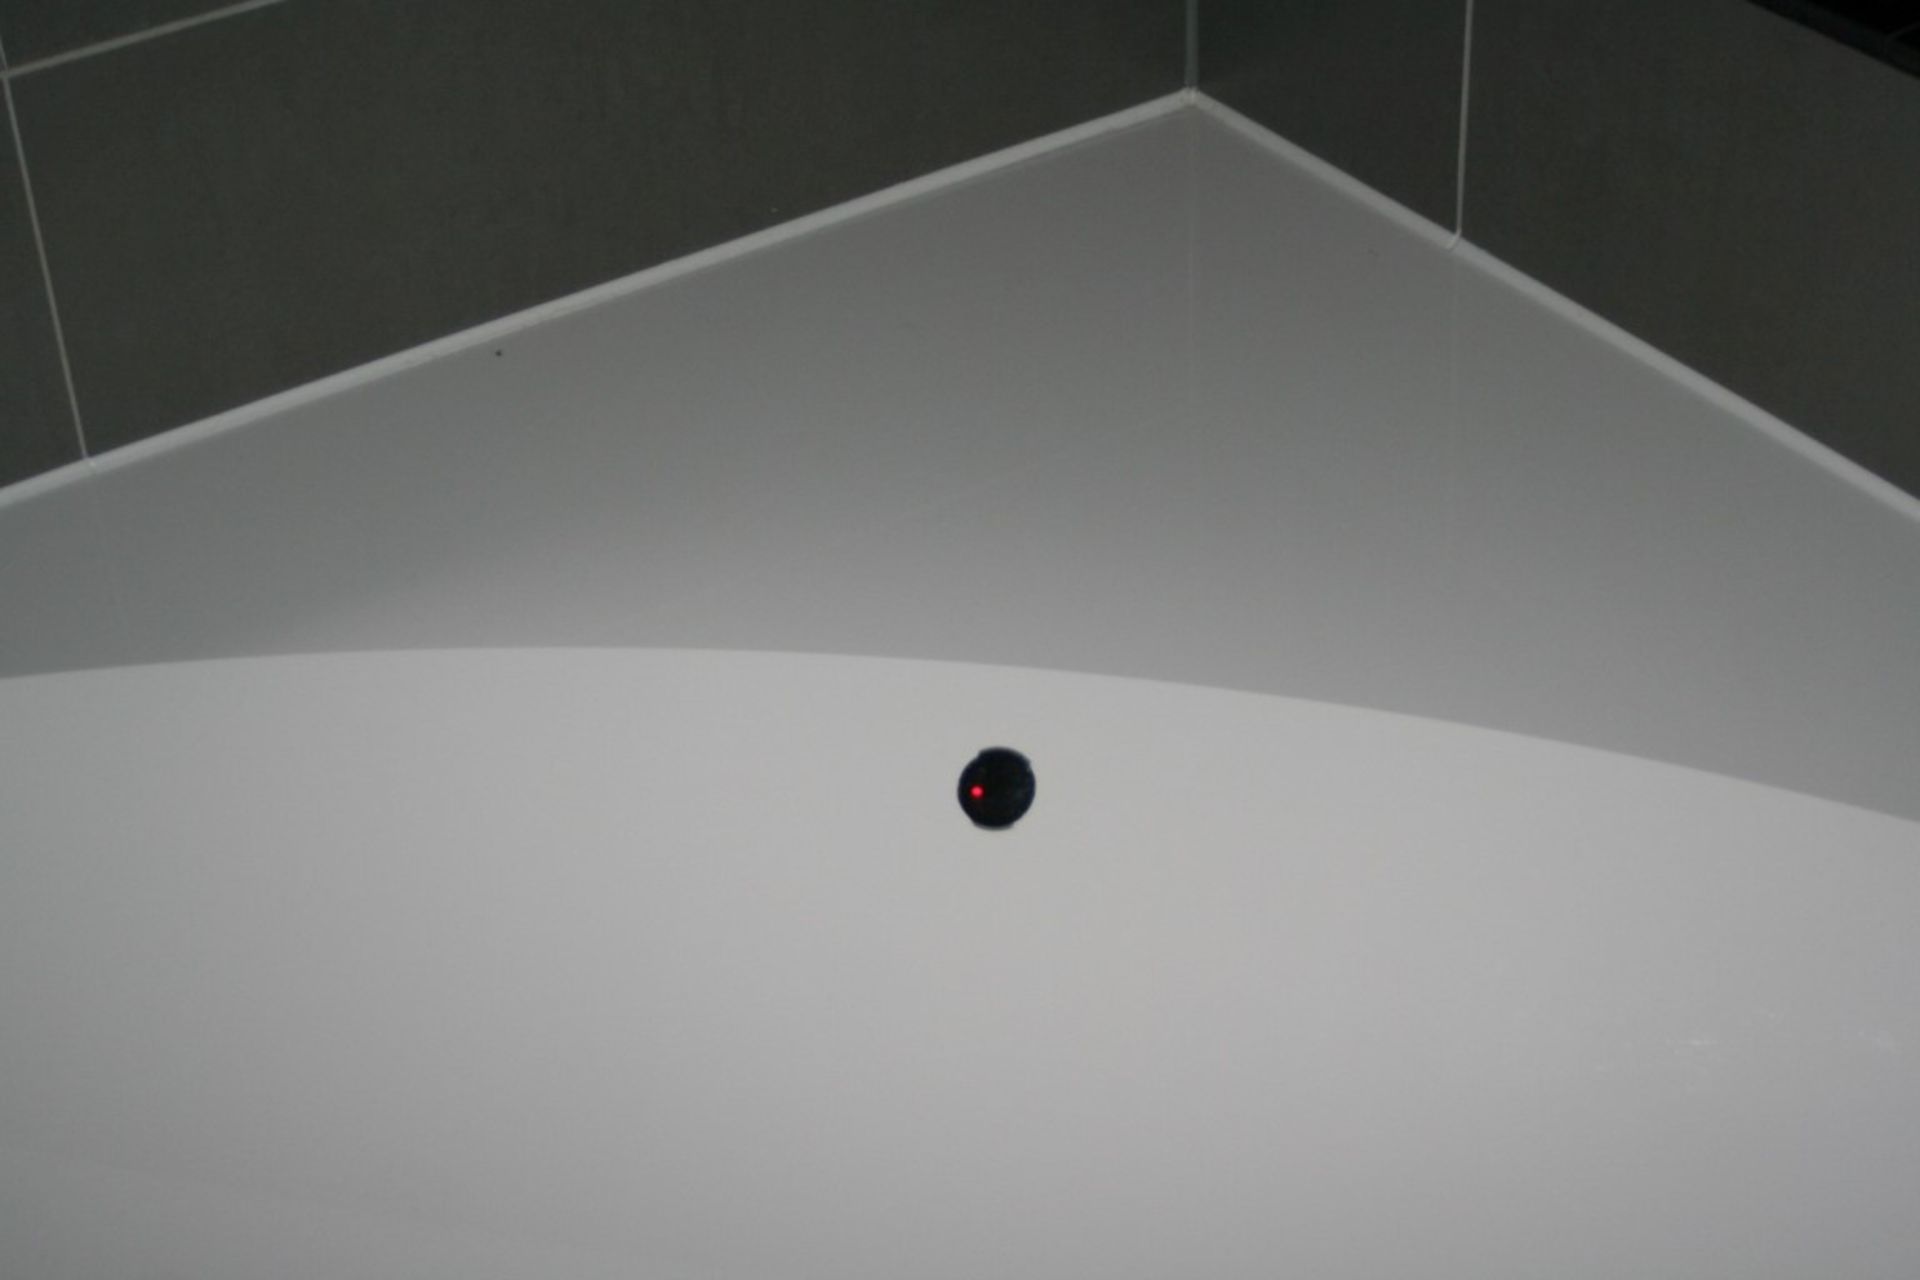 1 x Luxurious Villeroy & Boch Corner Whirlpool Bath - The Ultimate Fitness Combipool - Features 28 - Image 2 of 24